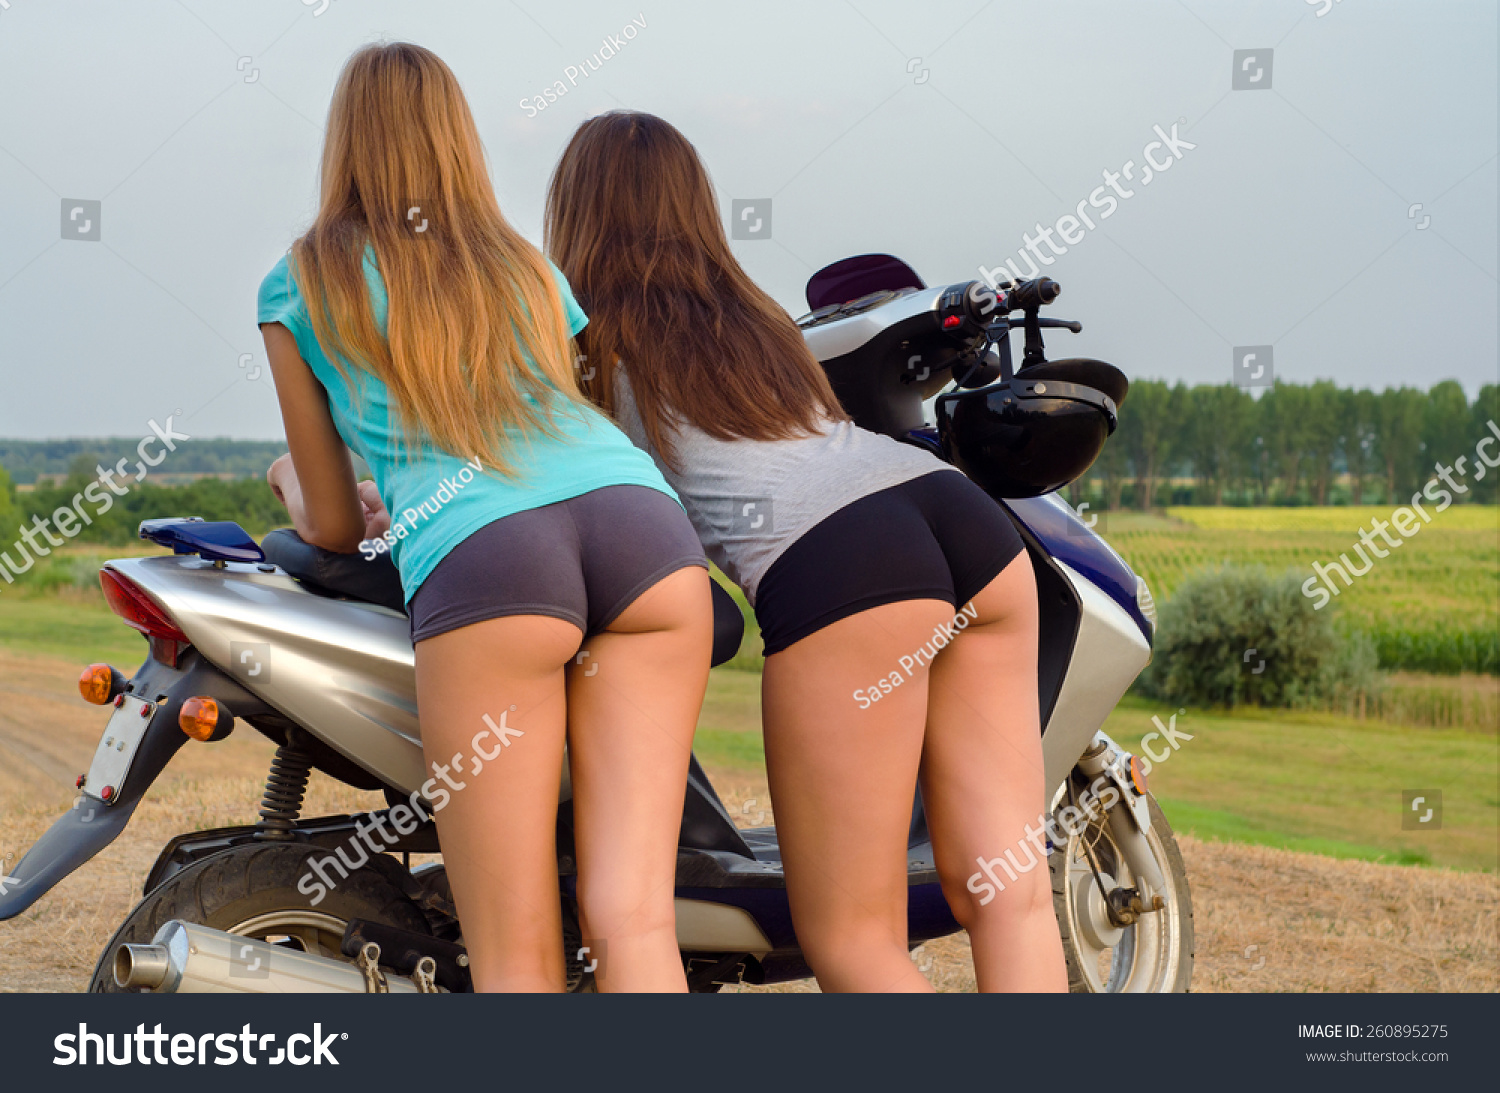 Hot Girls From Behind